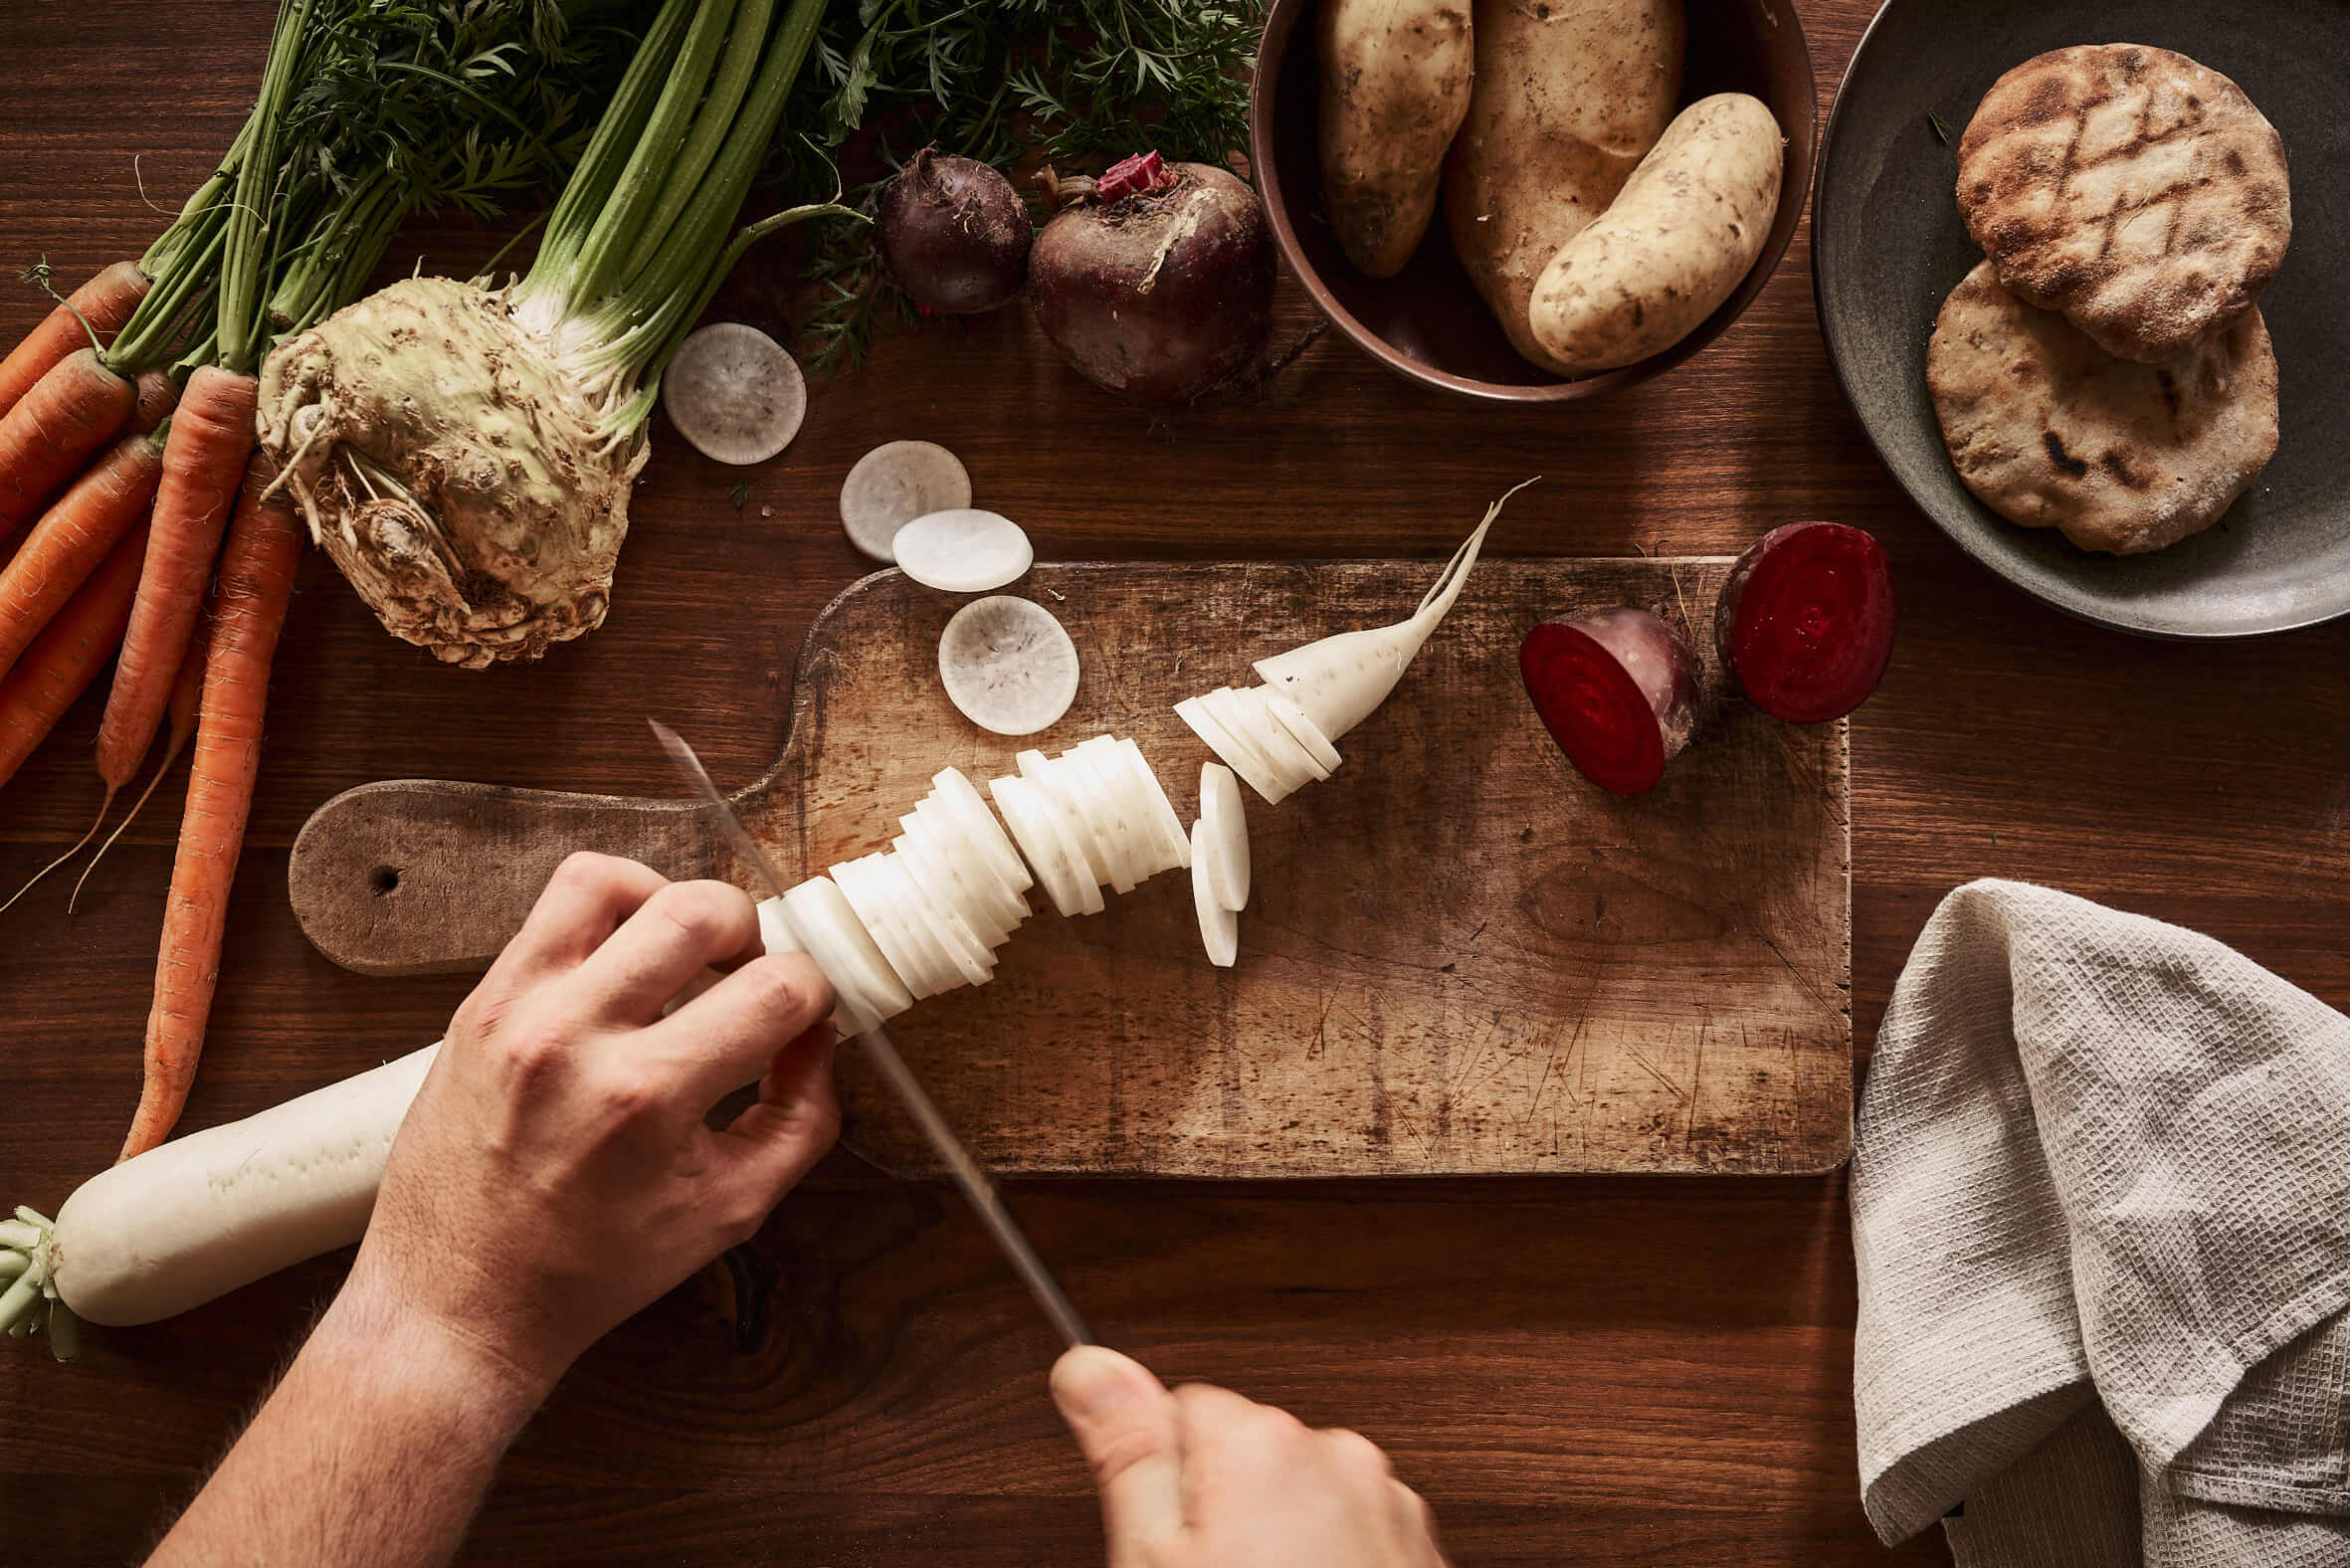 Hands of a person slicing a white radish on a wooden chopping board. Around the board are carrots, celeriac, beetroot and potatoes. 